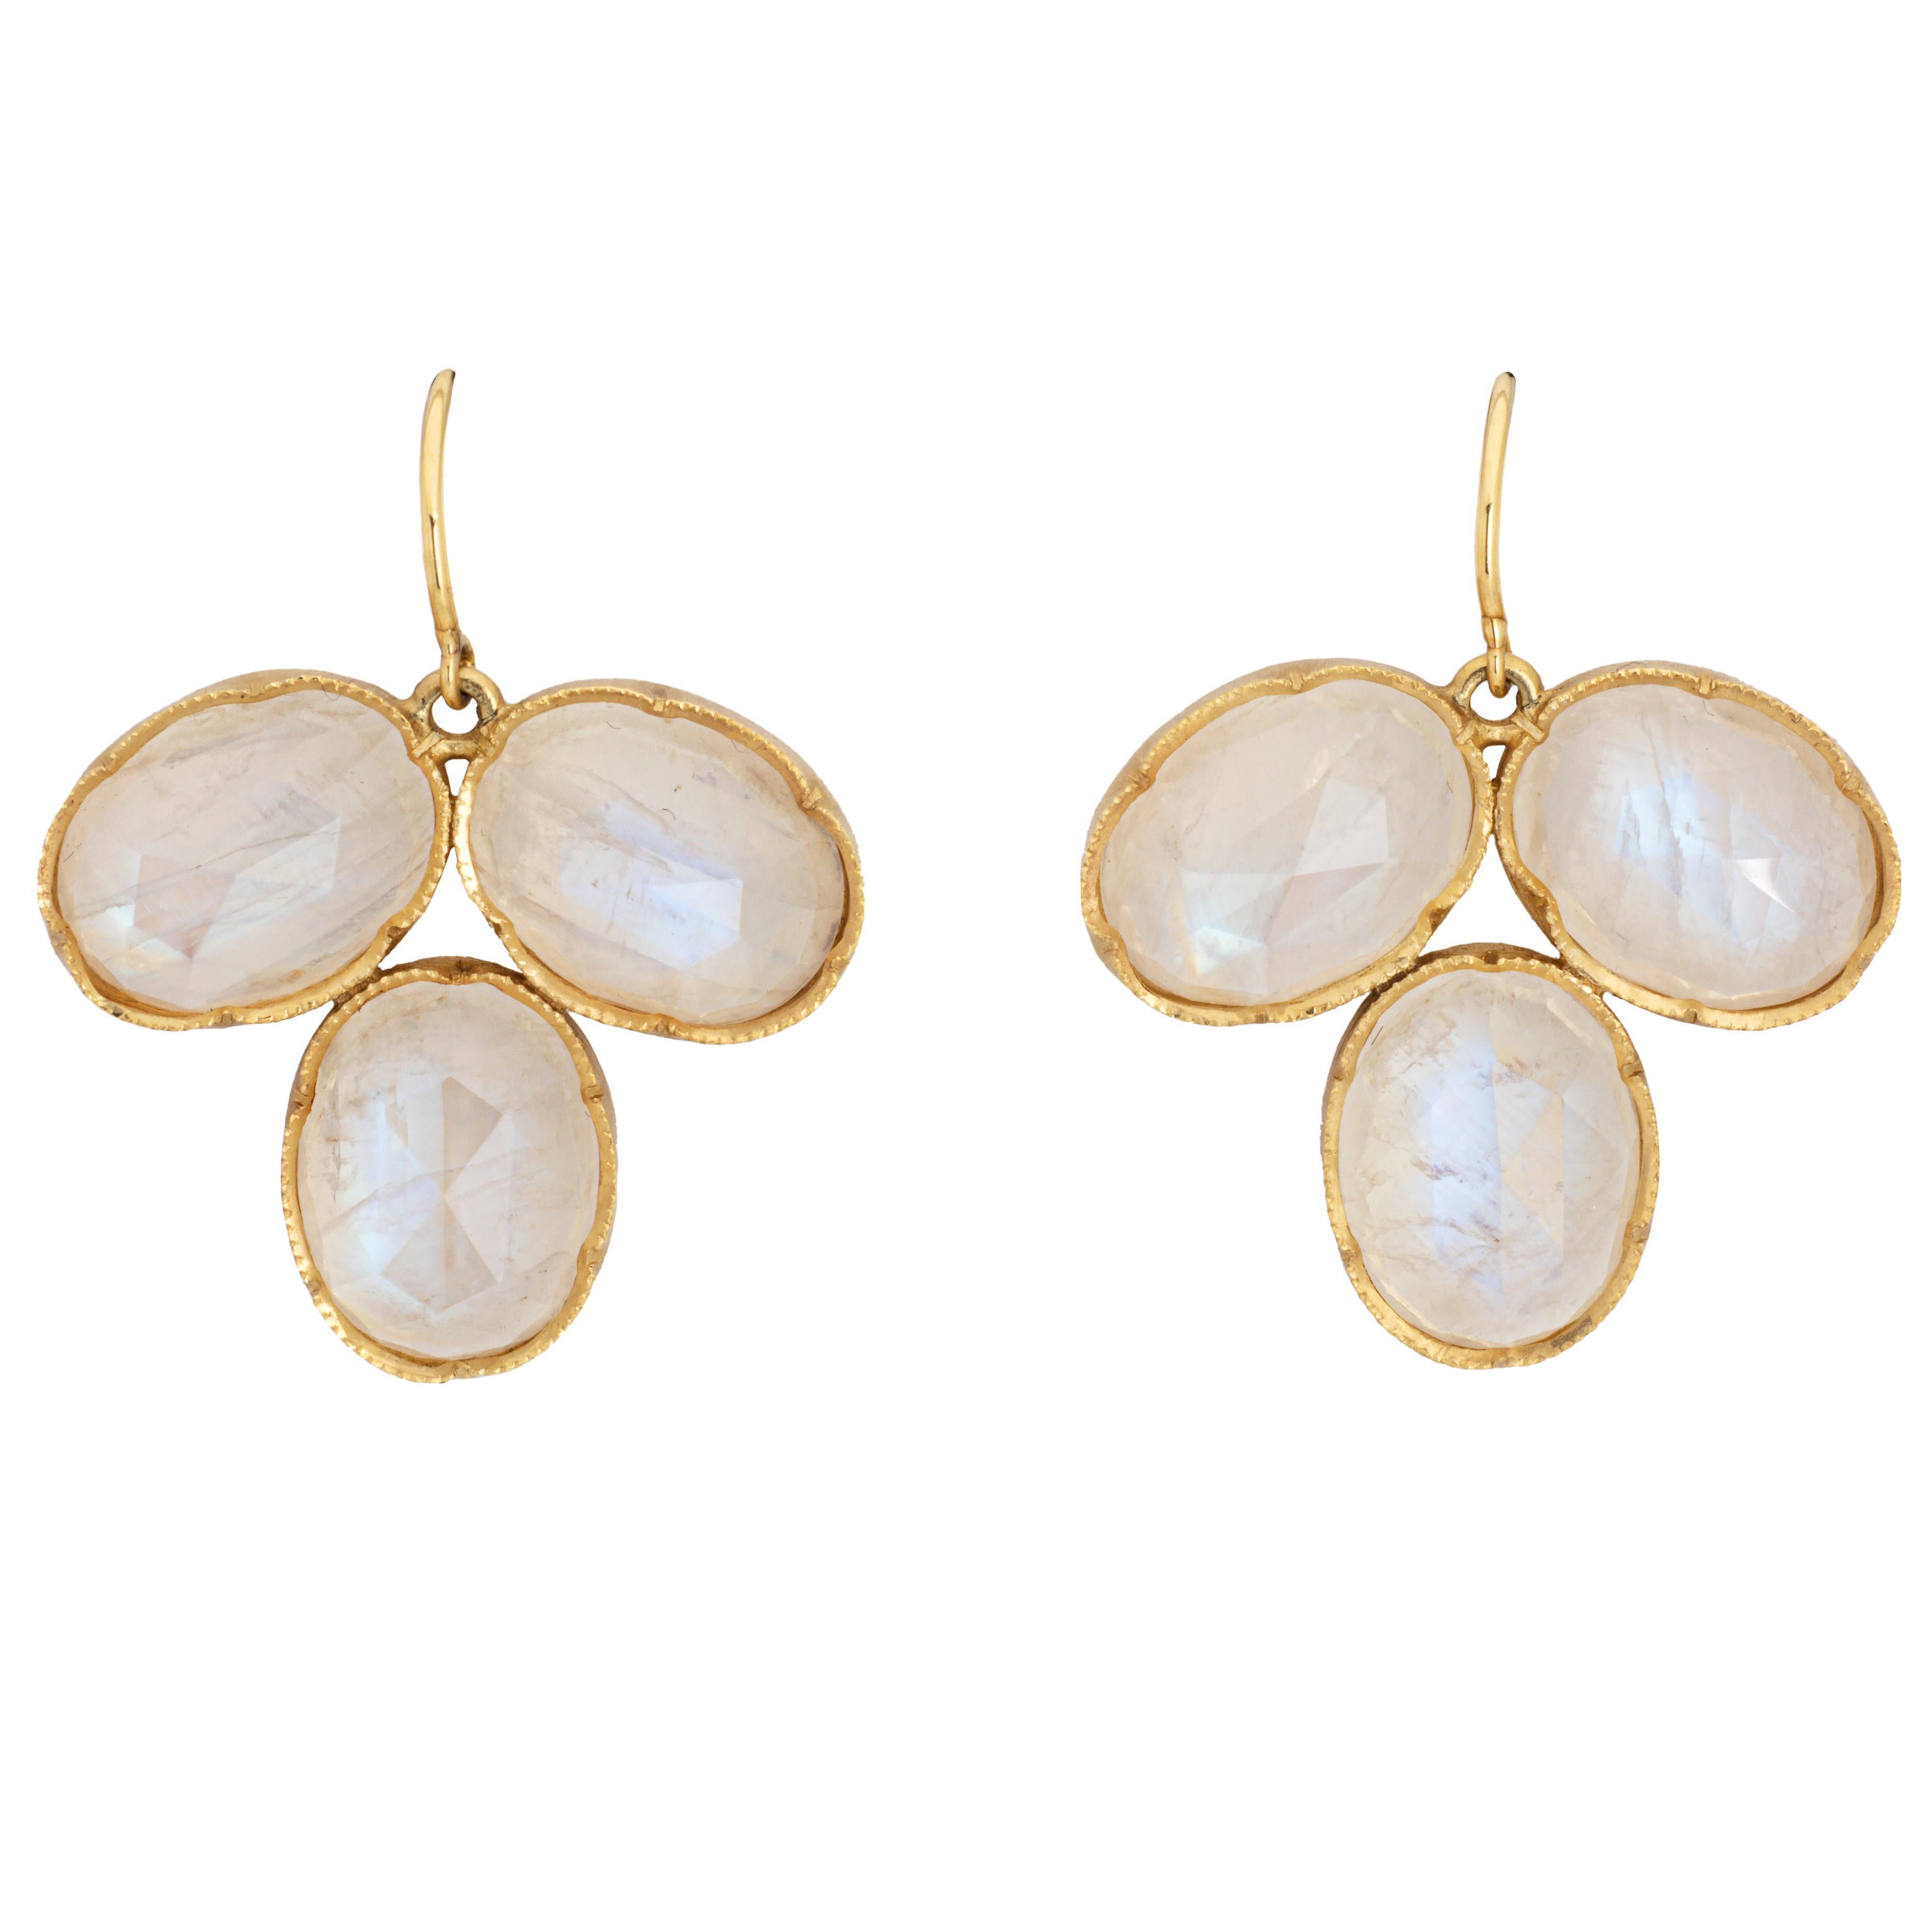 Irene Neuwirth Moonstone Earrings Estate 18k Gold 1" Drops Signed Fine Jewelry  For Sale